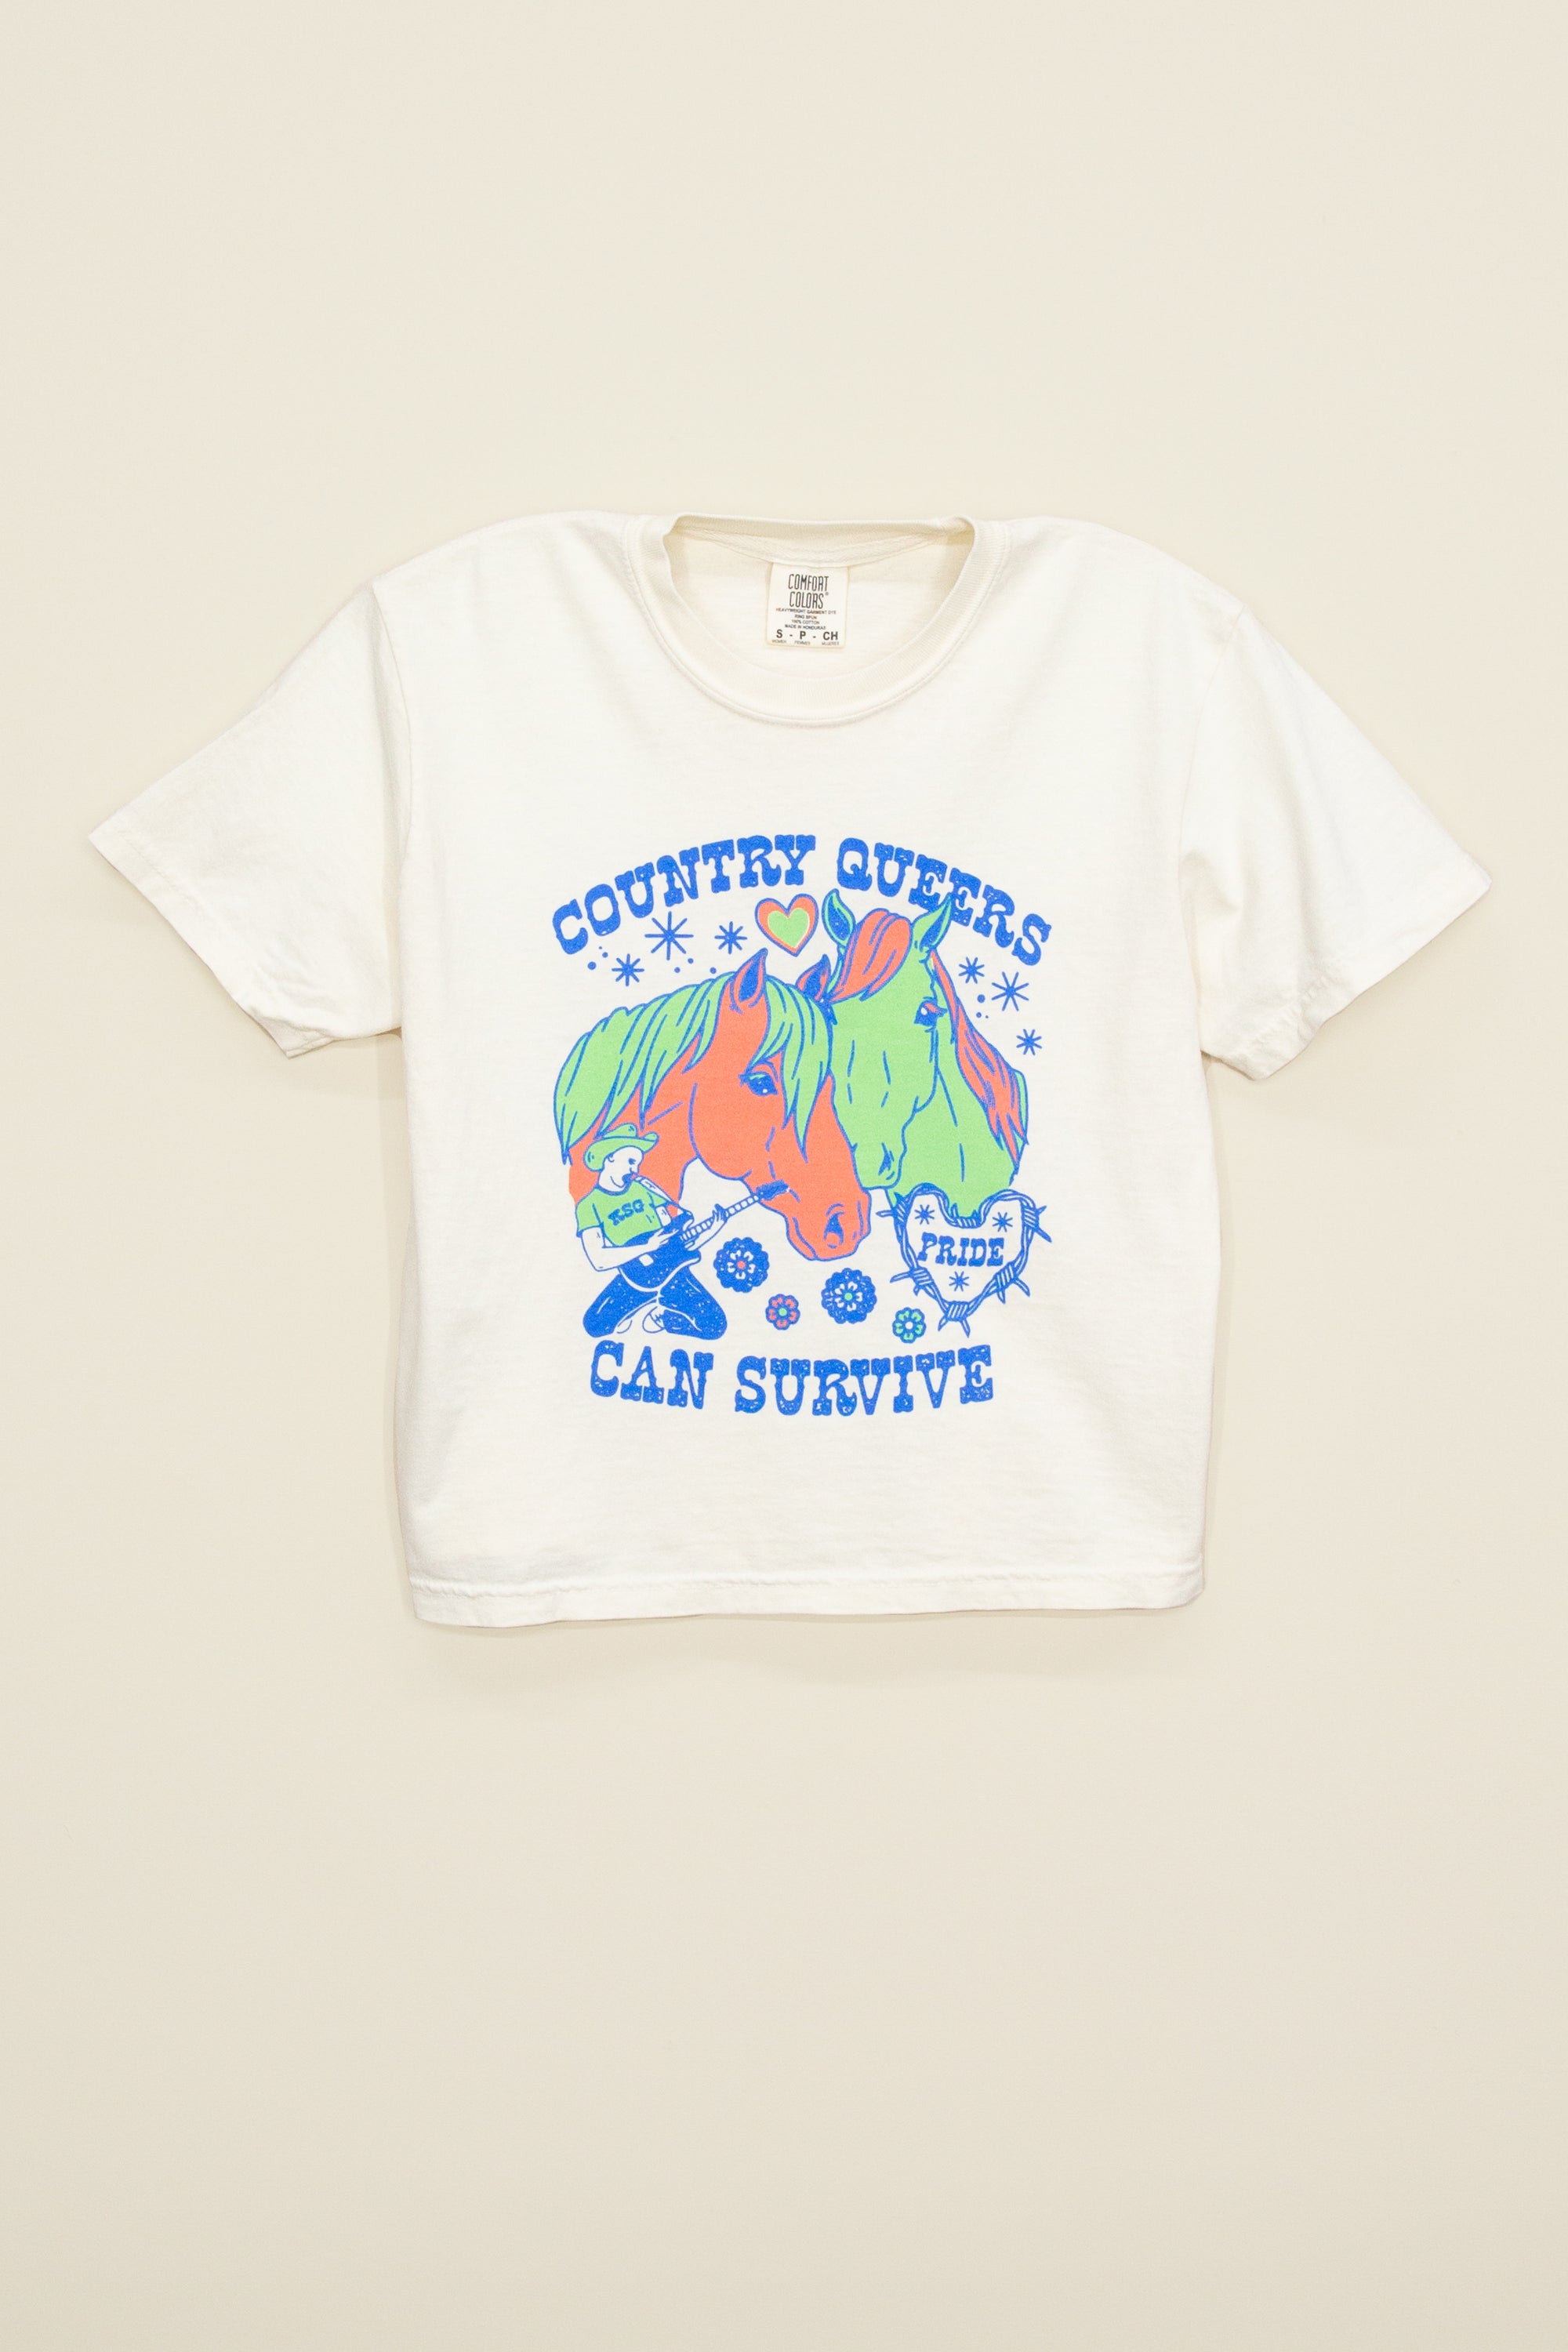 country queers can survive crop tee